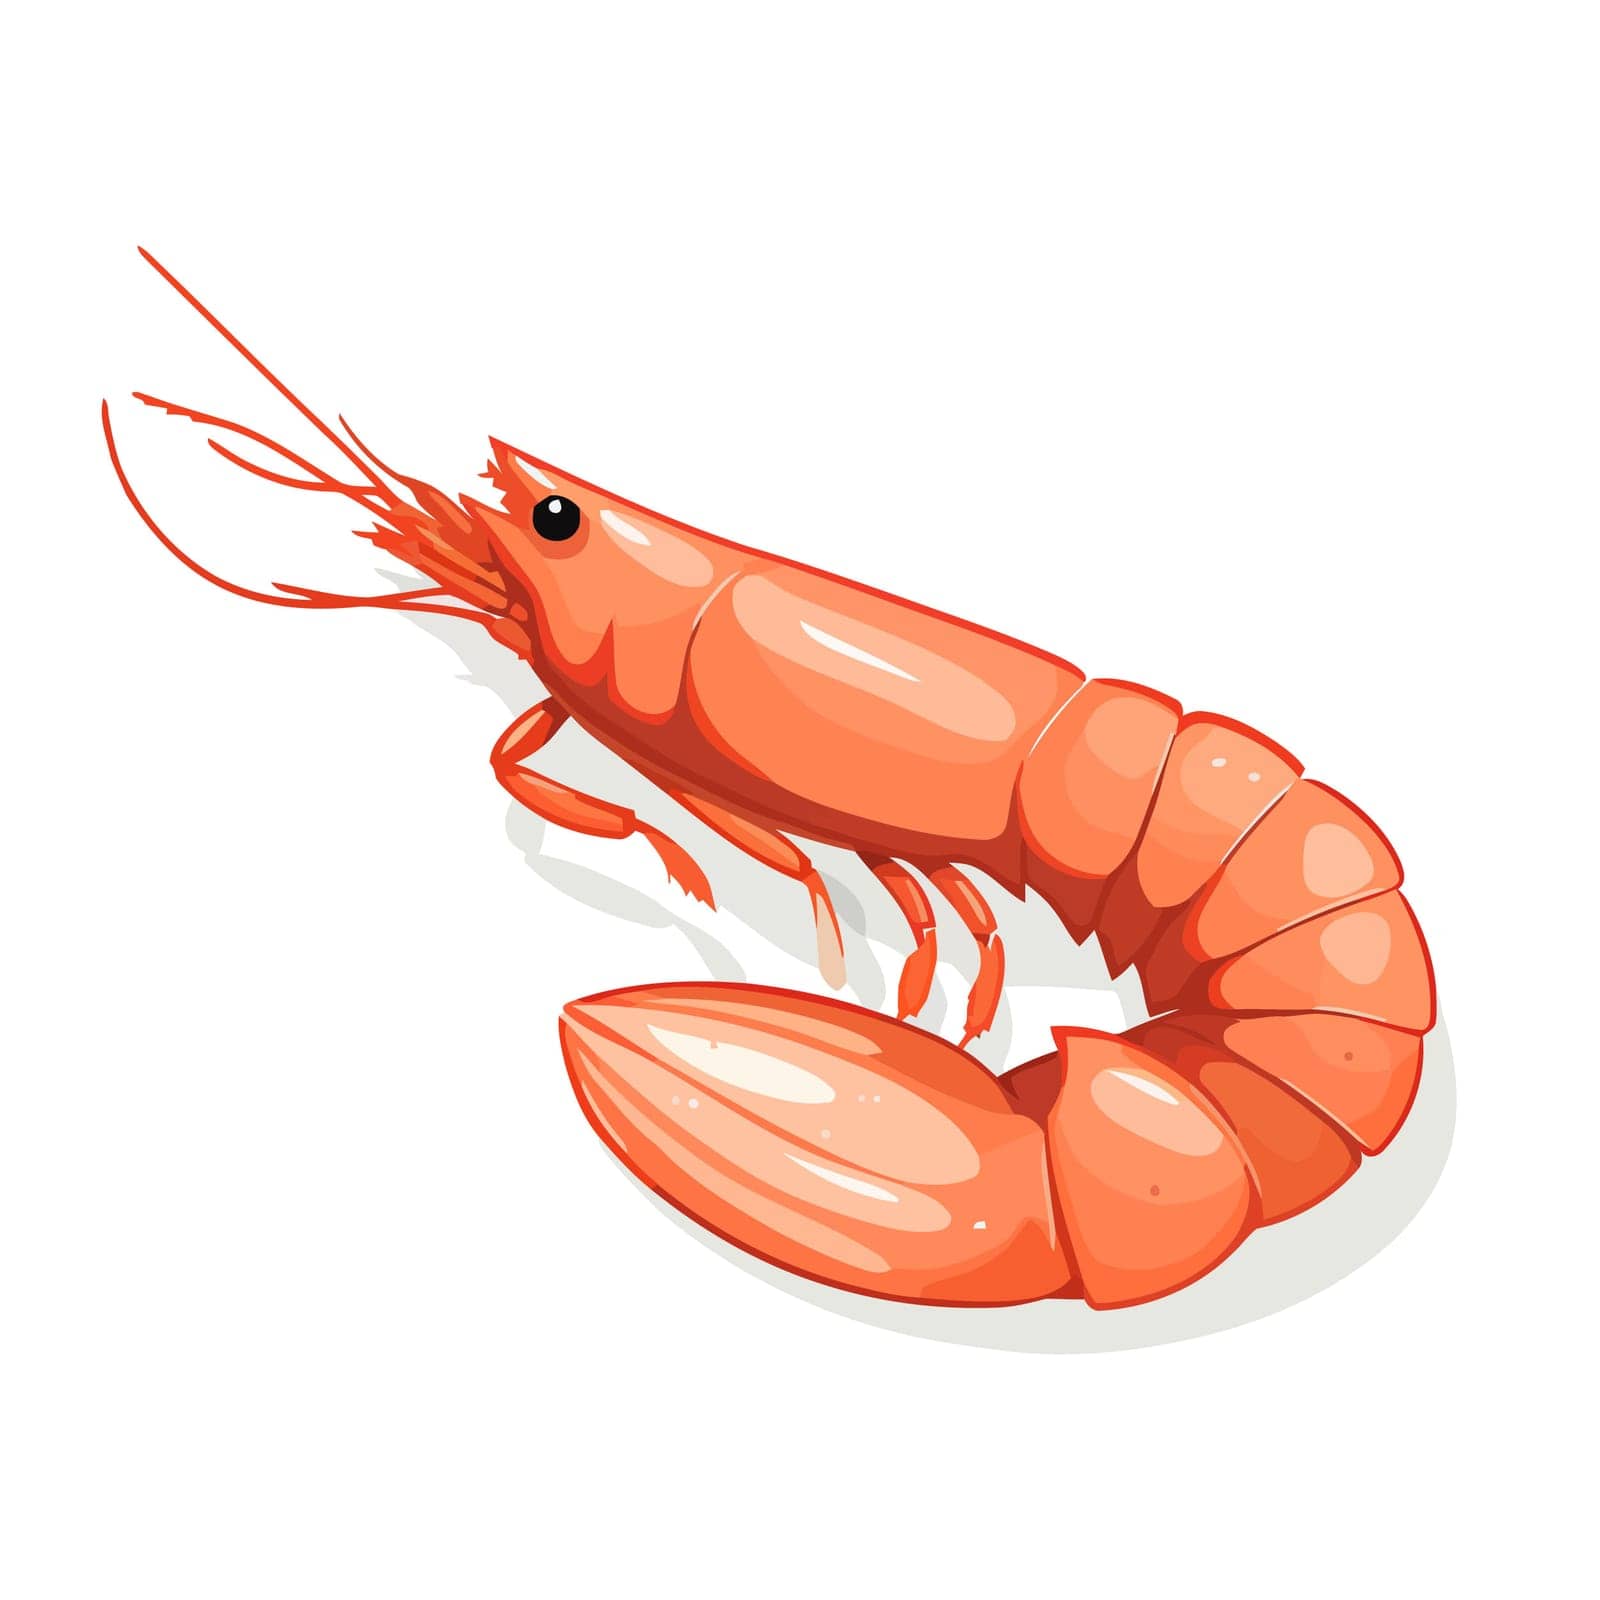 Shrimp image isolated. Shrimp icon. Cute red prawn in flat design. by Chekman